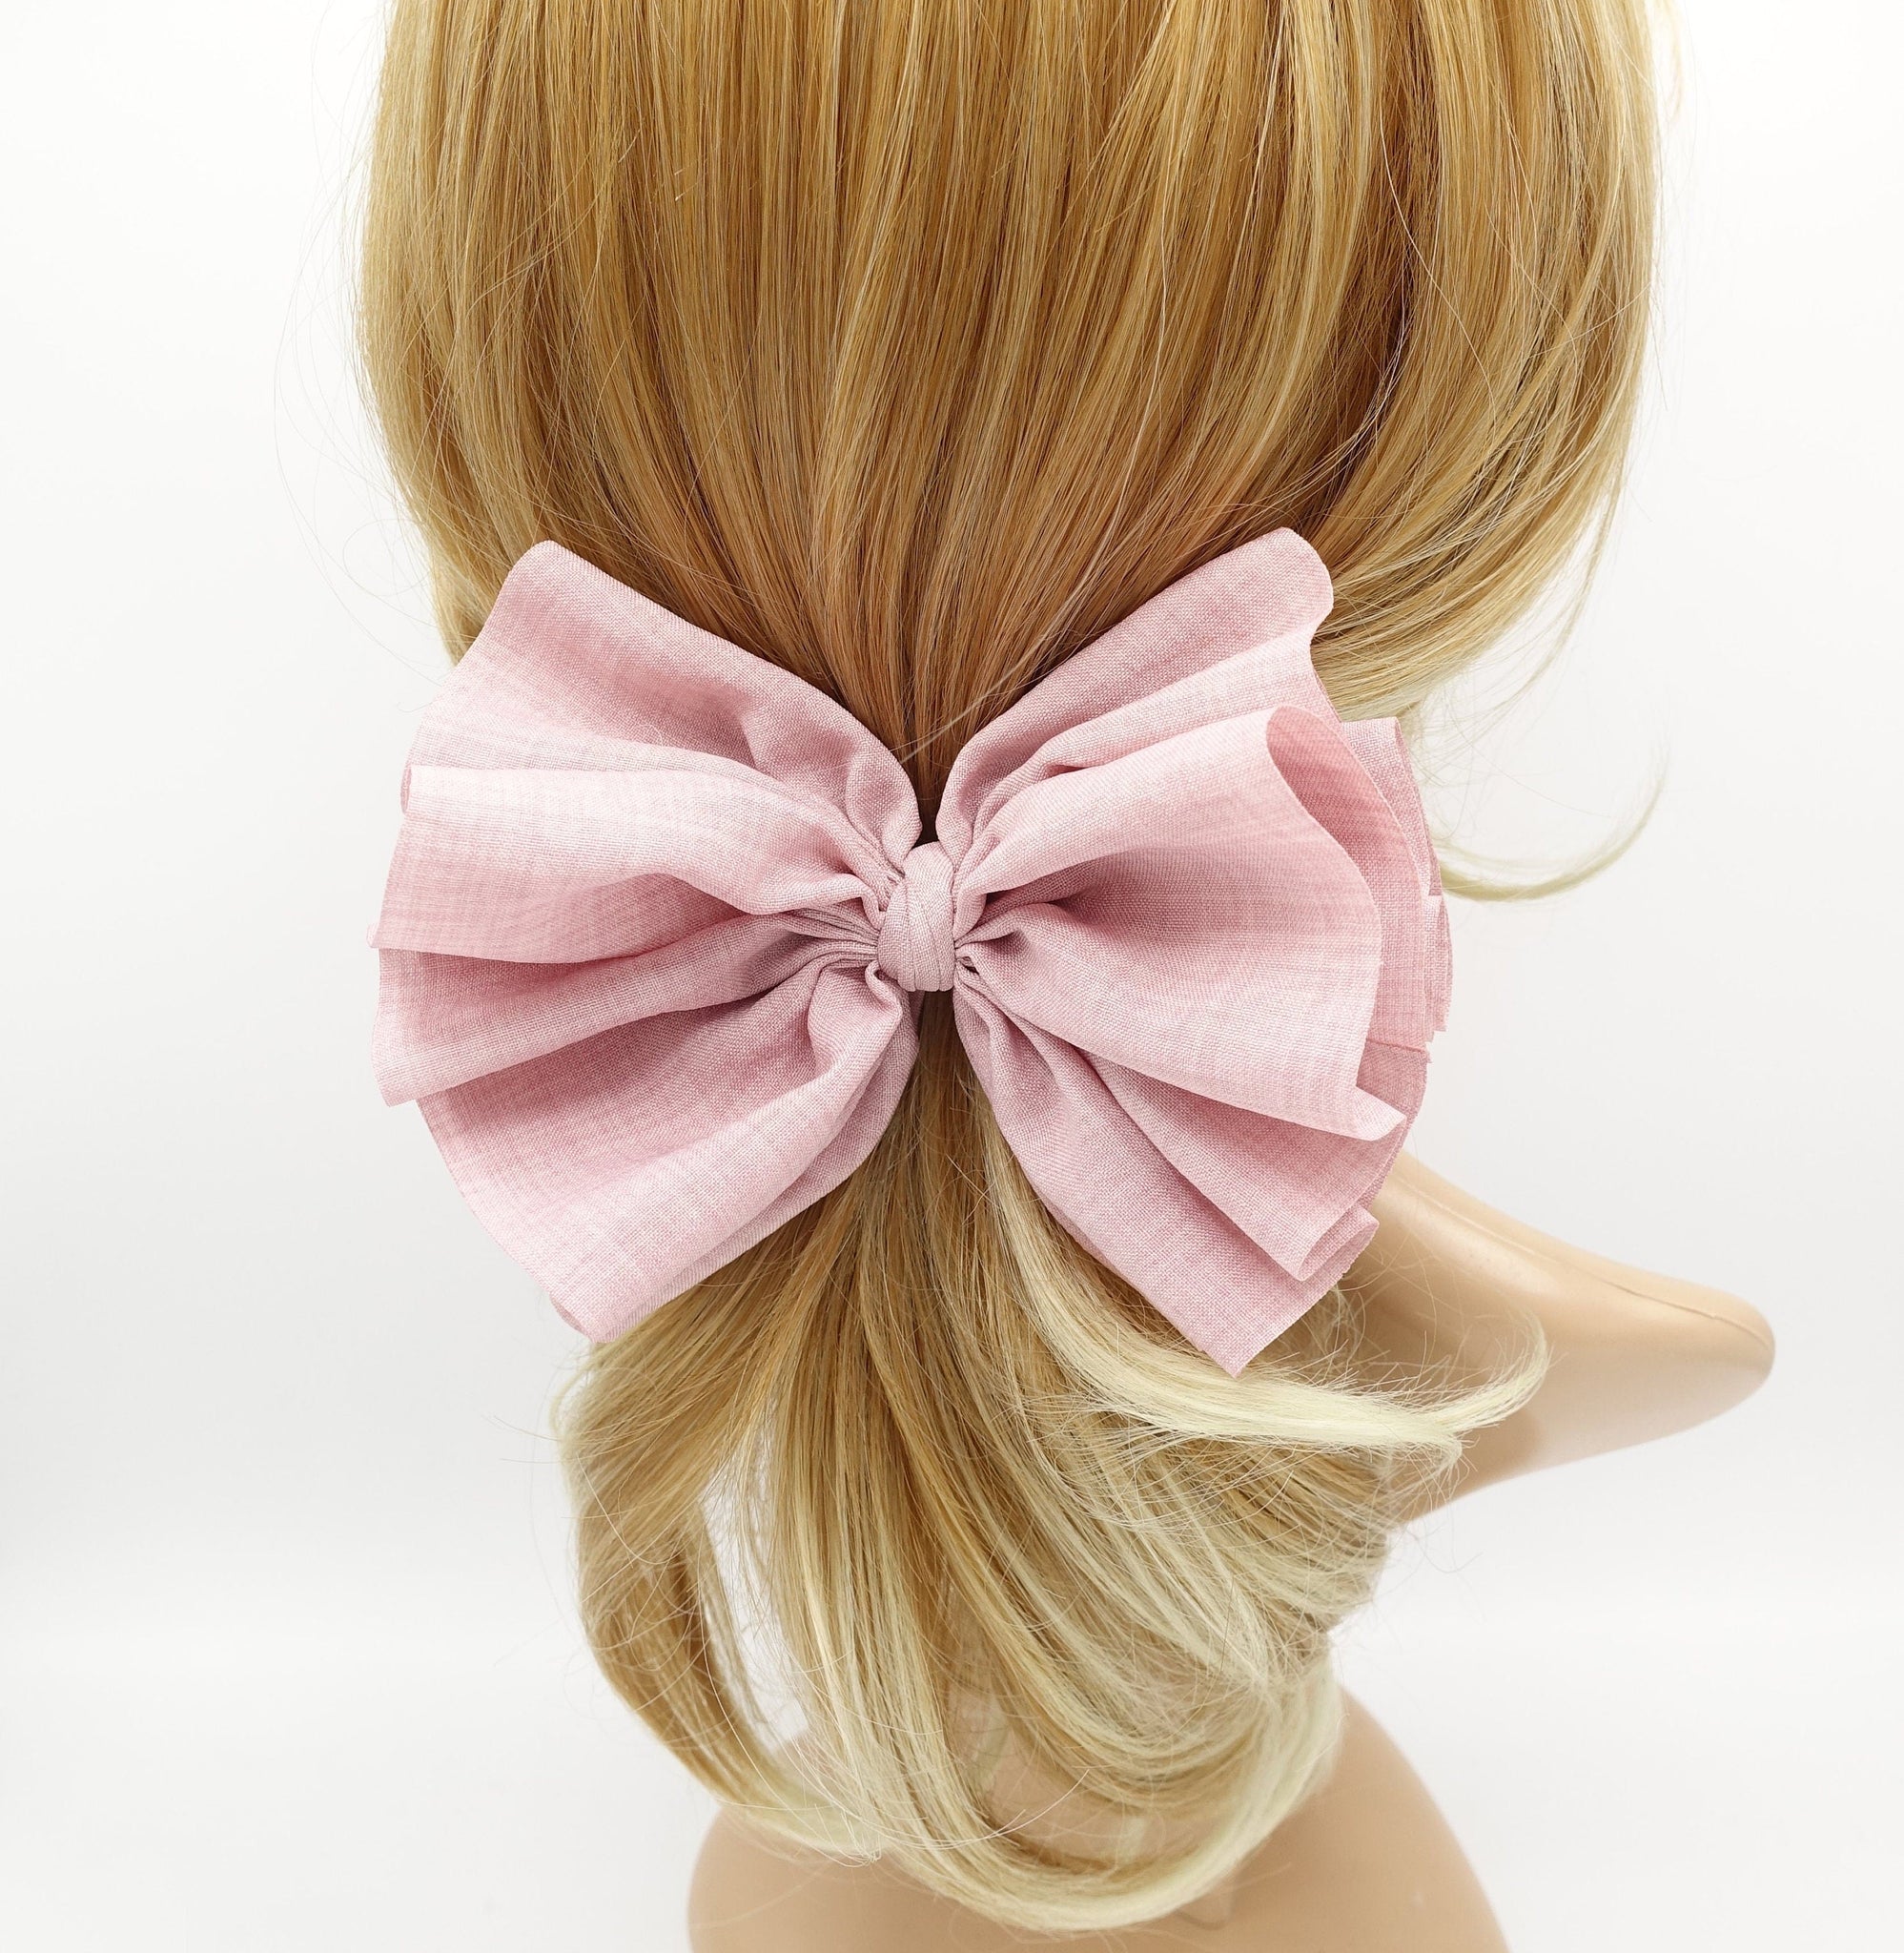 veryshine.com Barrette (Bow) Pale pink volume pleated hair bow french barrette women hair accessory